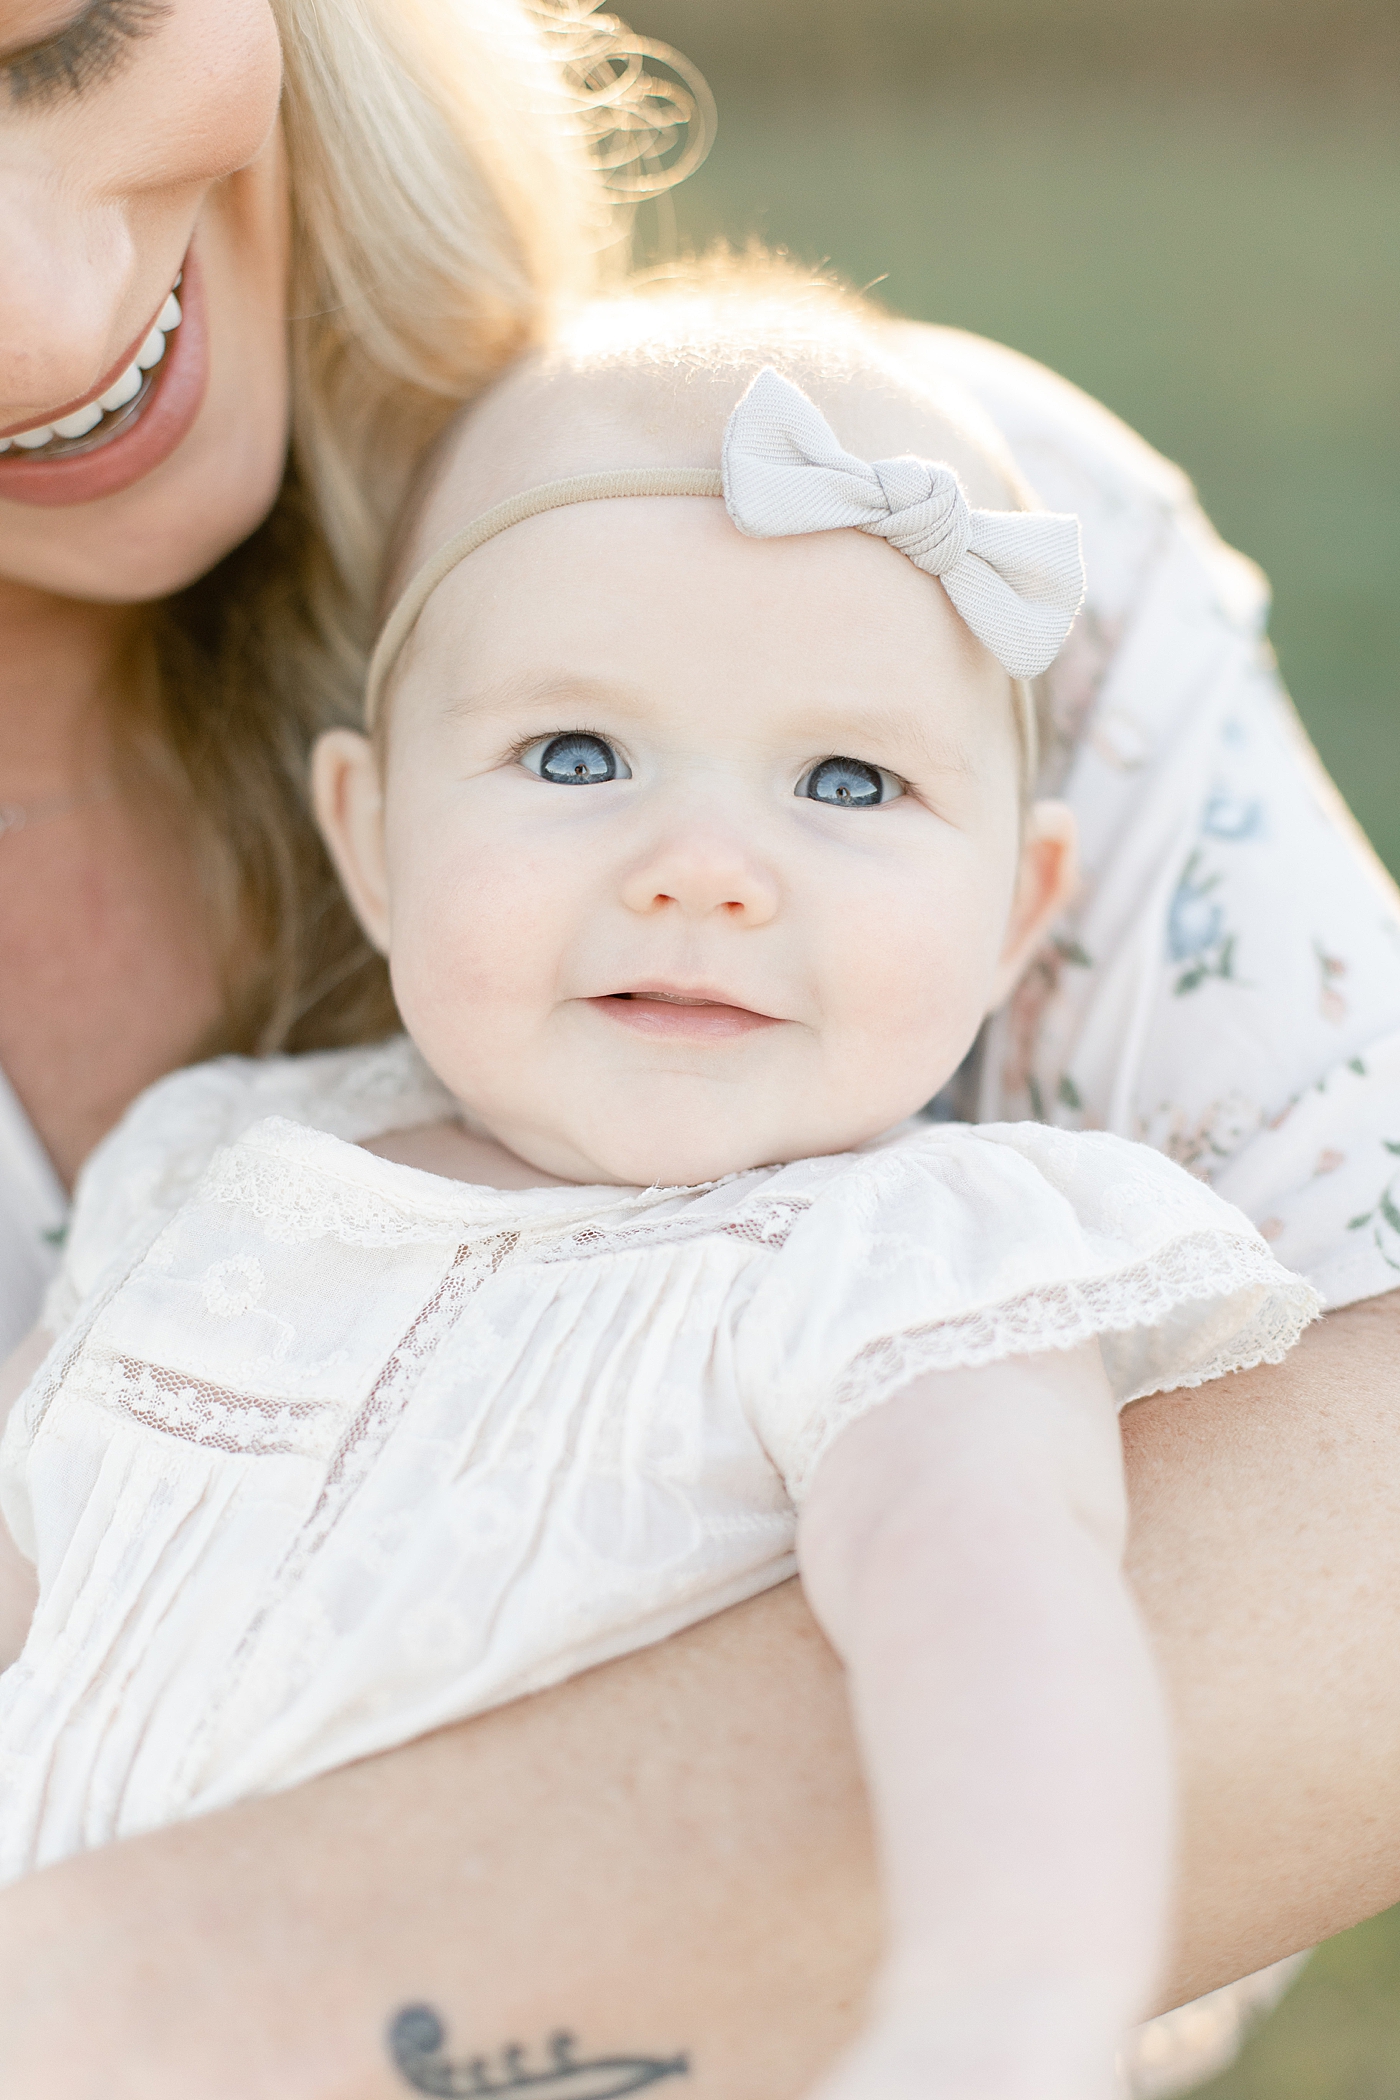 Baby girl with blue eyes held by mom | Photo by Little Sunshine Photography